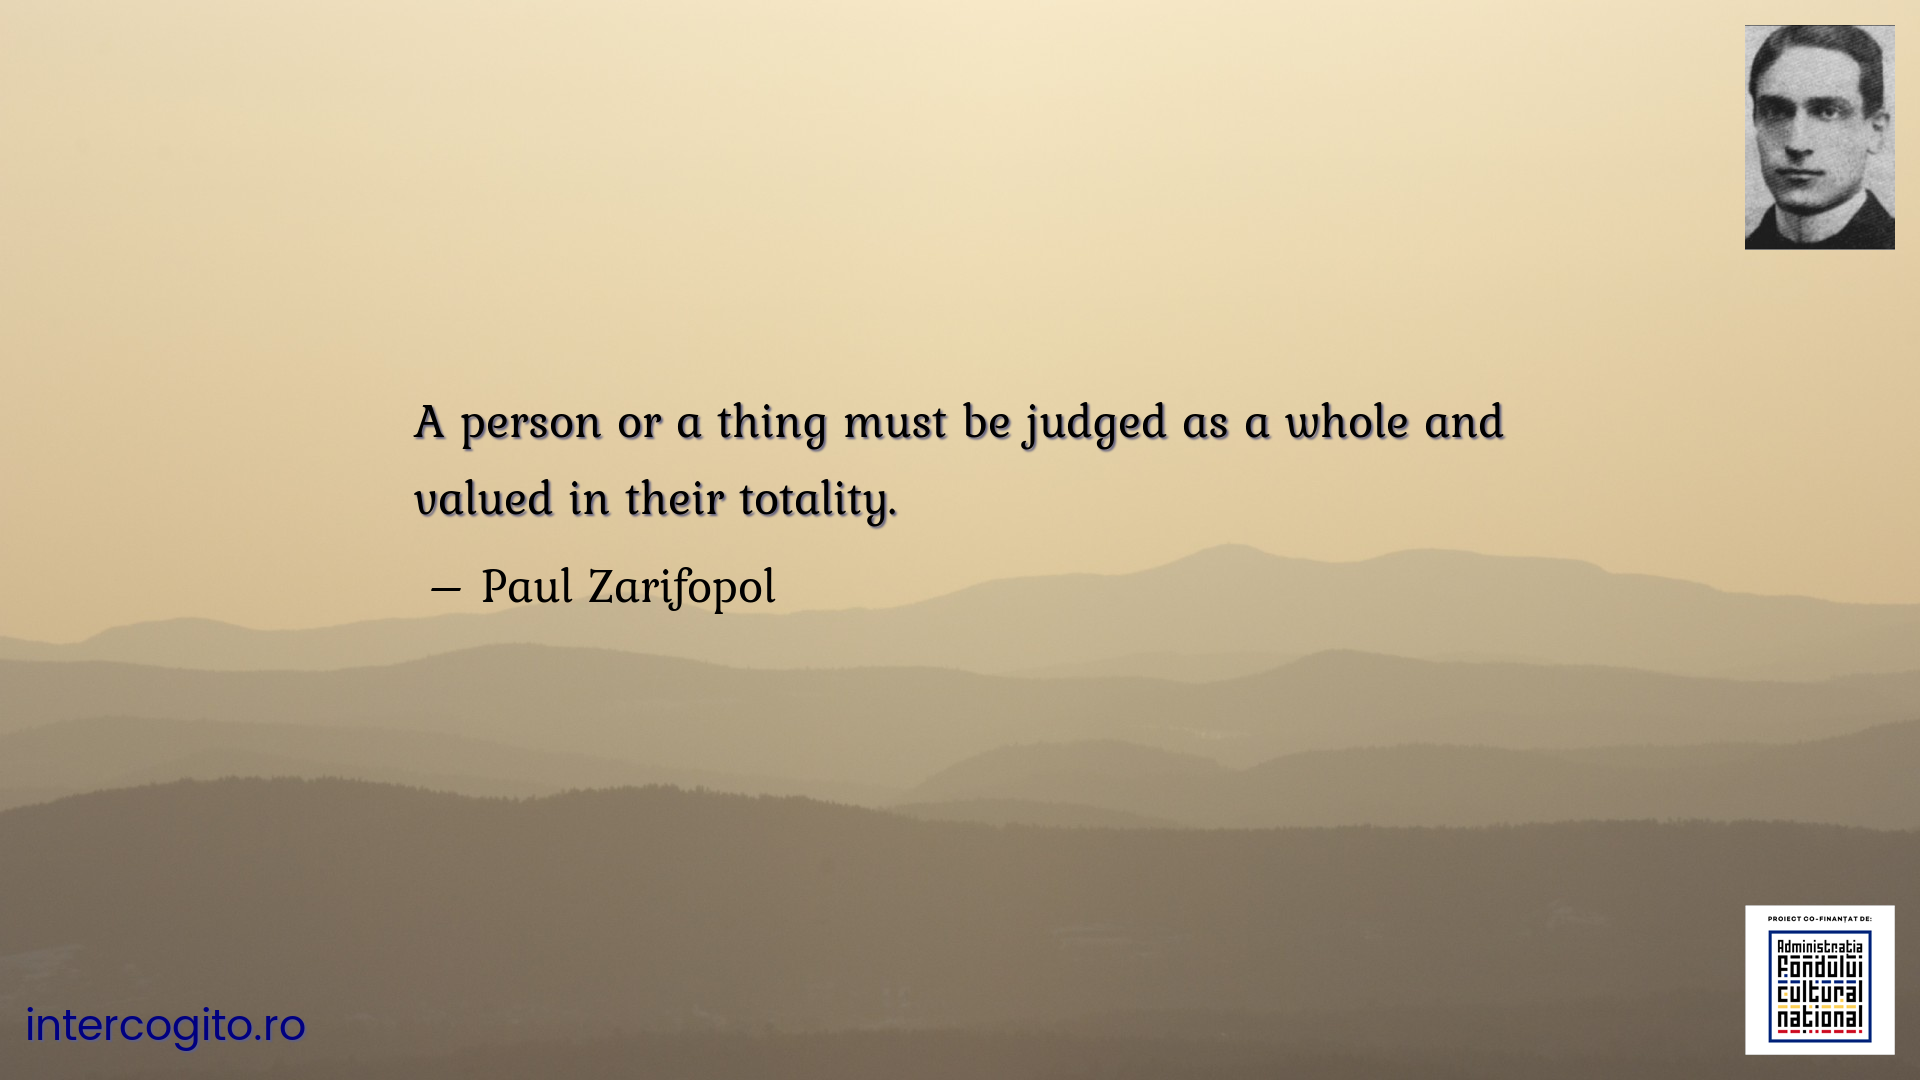 A person or a thing must be judged as a whole and valued in their totality.